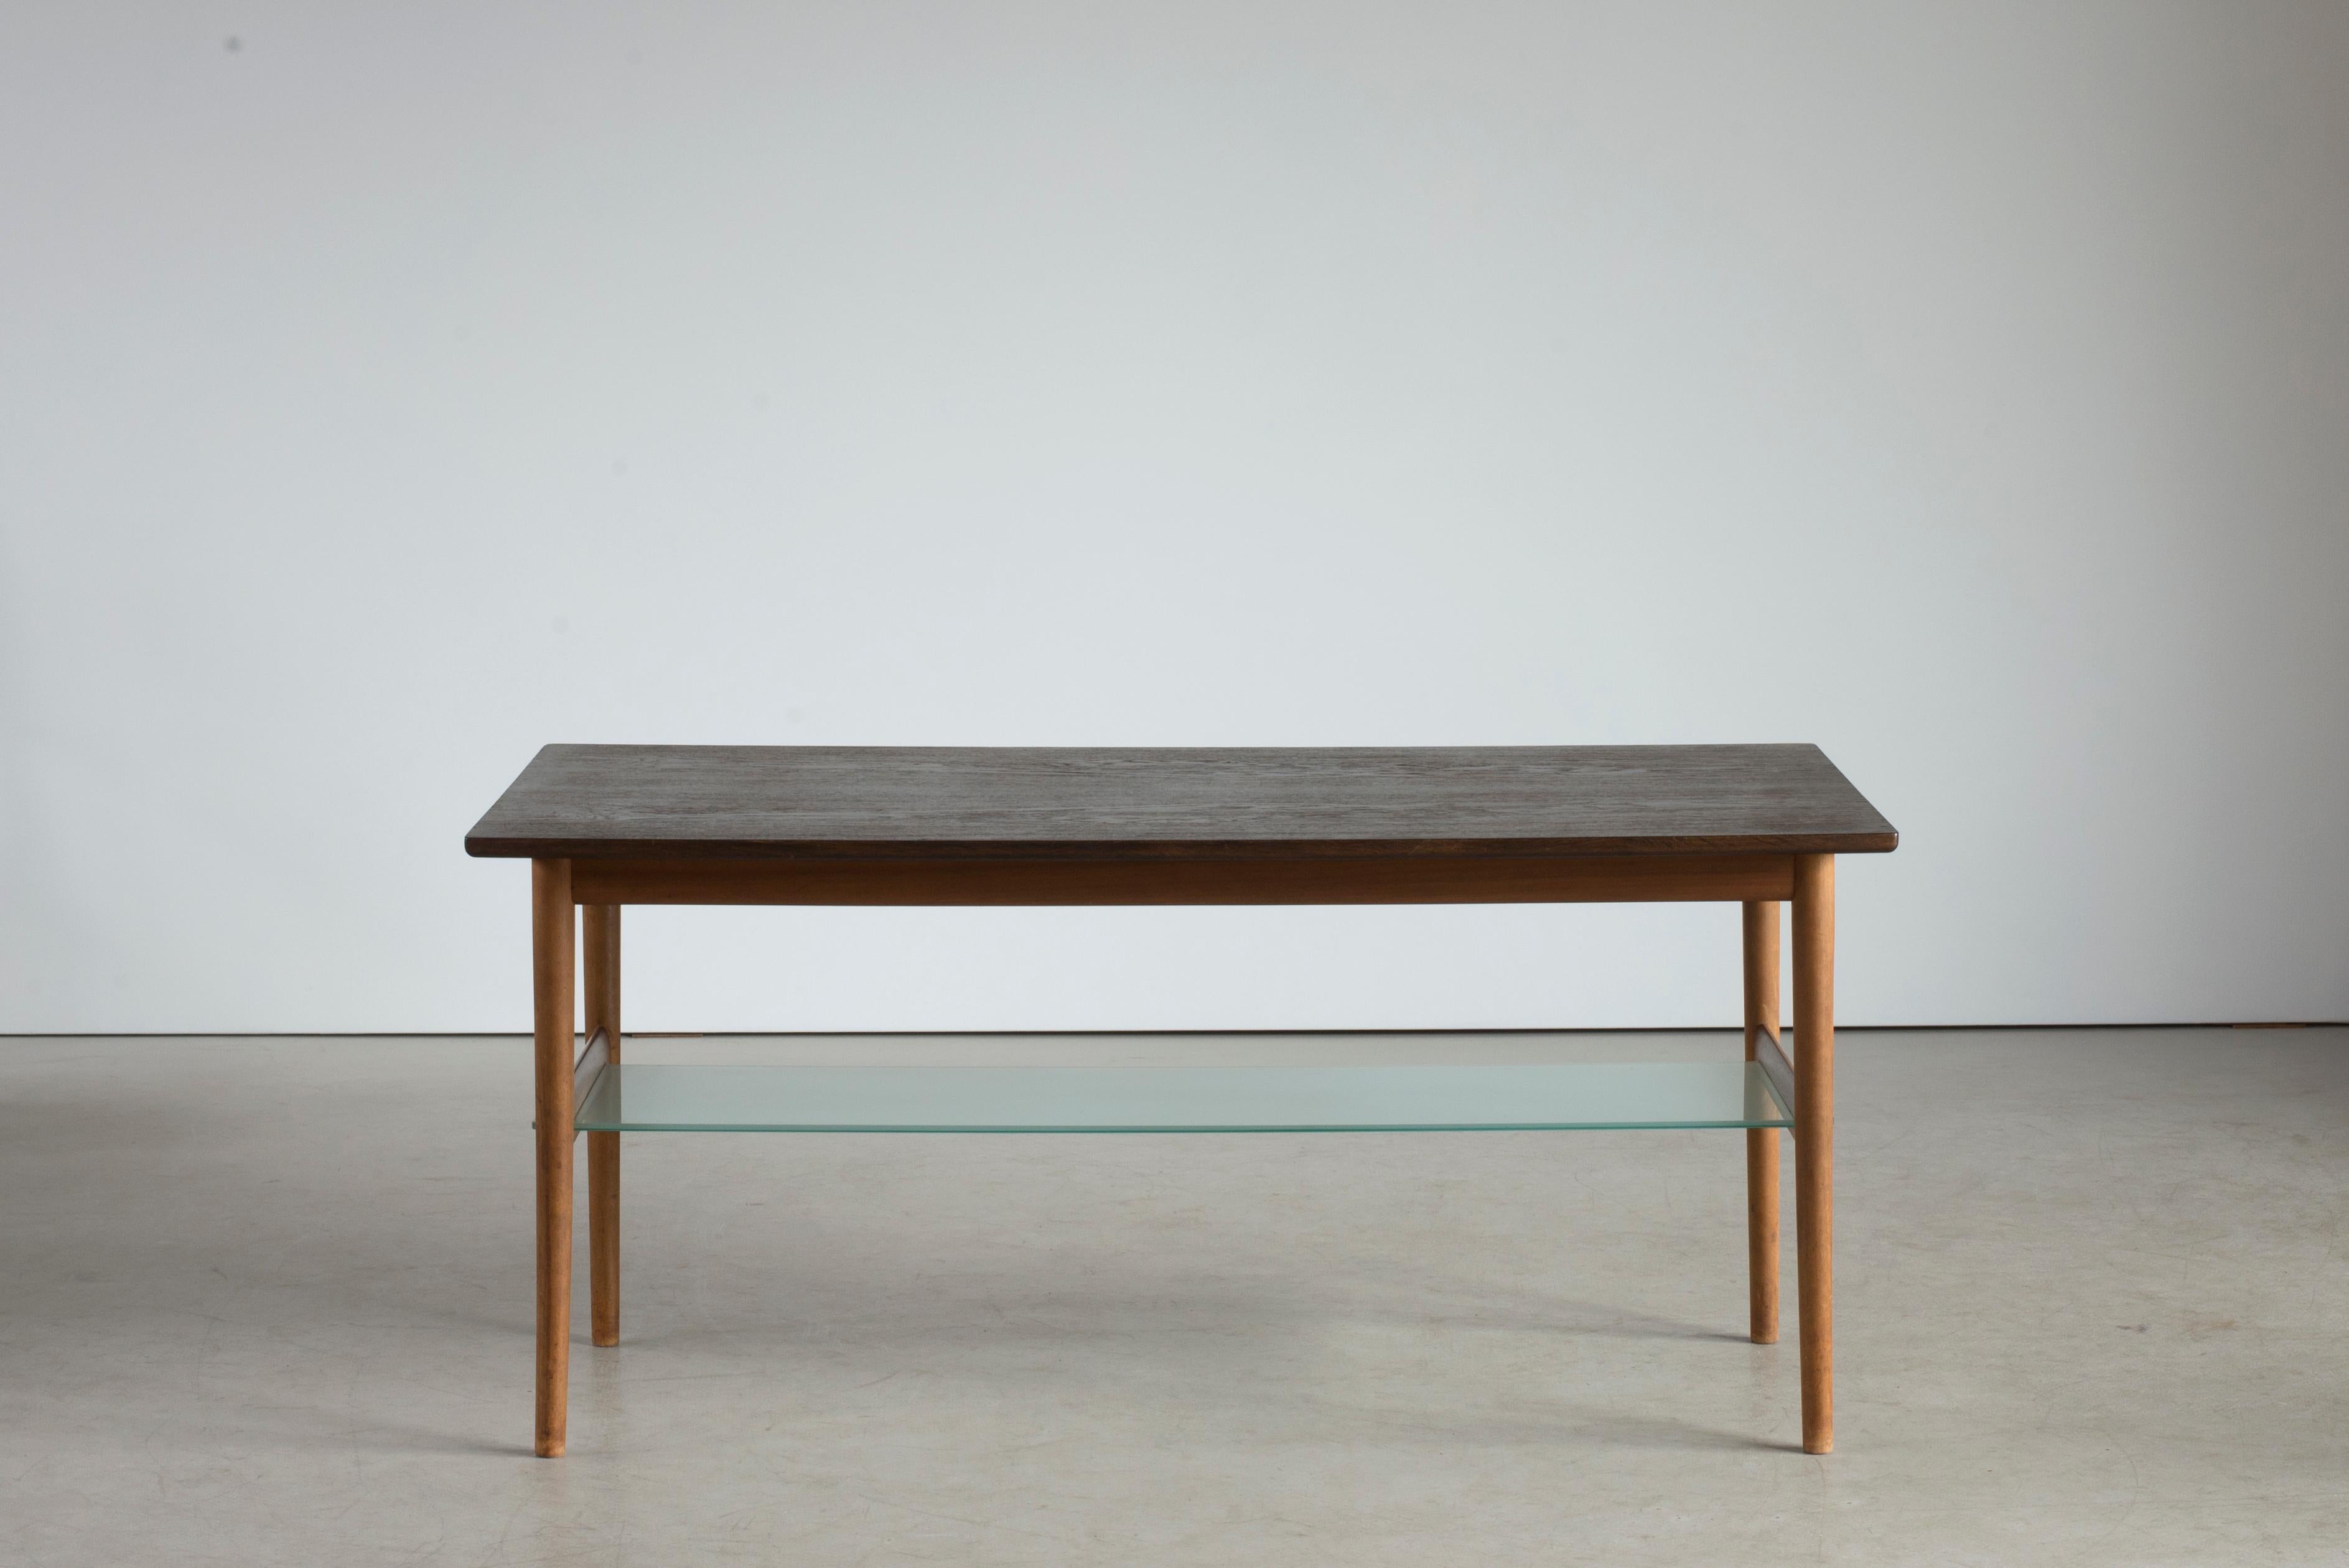 Coffee table with walnut frame, rectangular top of marsh oak. Executed by cabinetmaker Niels Vodder, 1955. Stamped by maker. Measures: H. 60 cm., L. 129.5 cm., W. 65 cm.

Acquired at the Copenhagen cabinetmakers' guild exhibition in